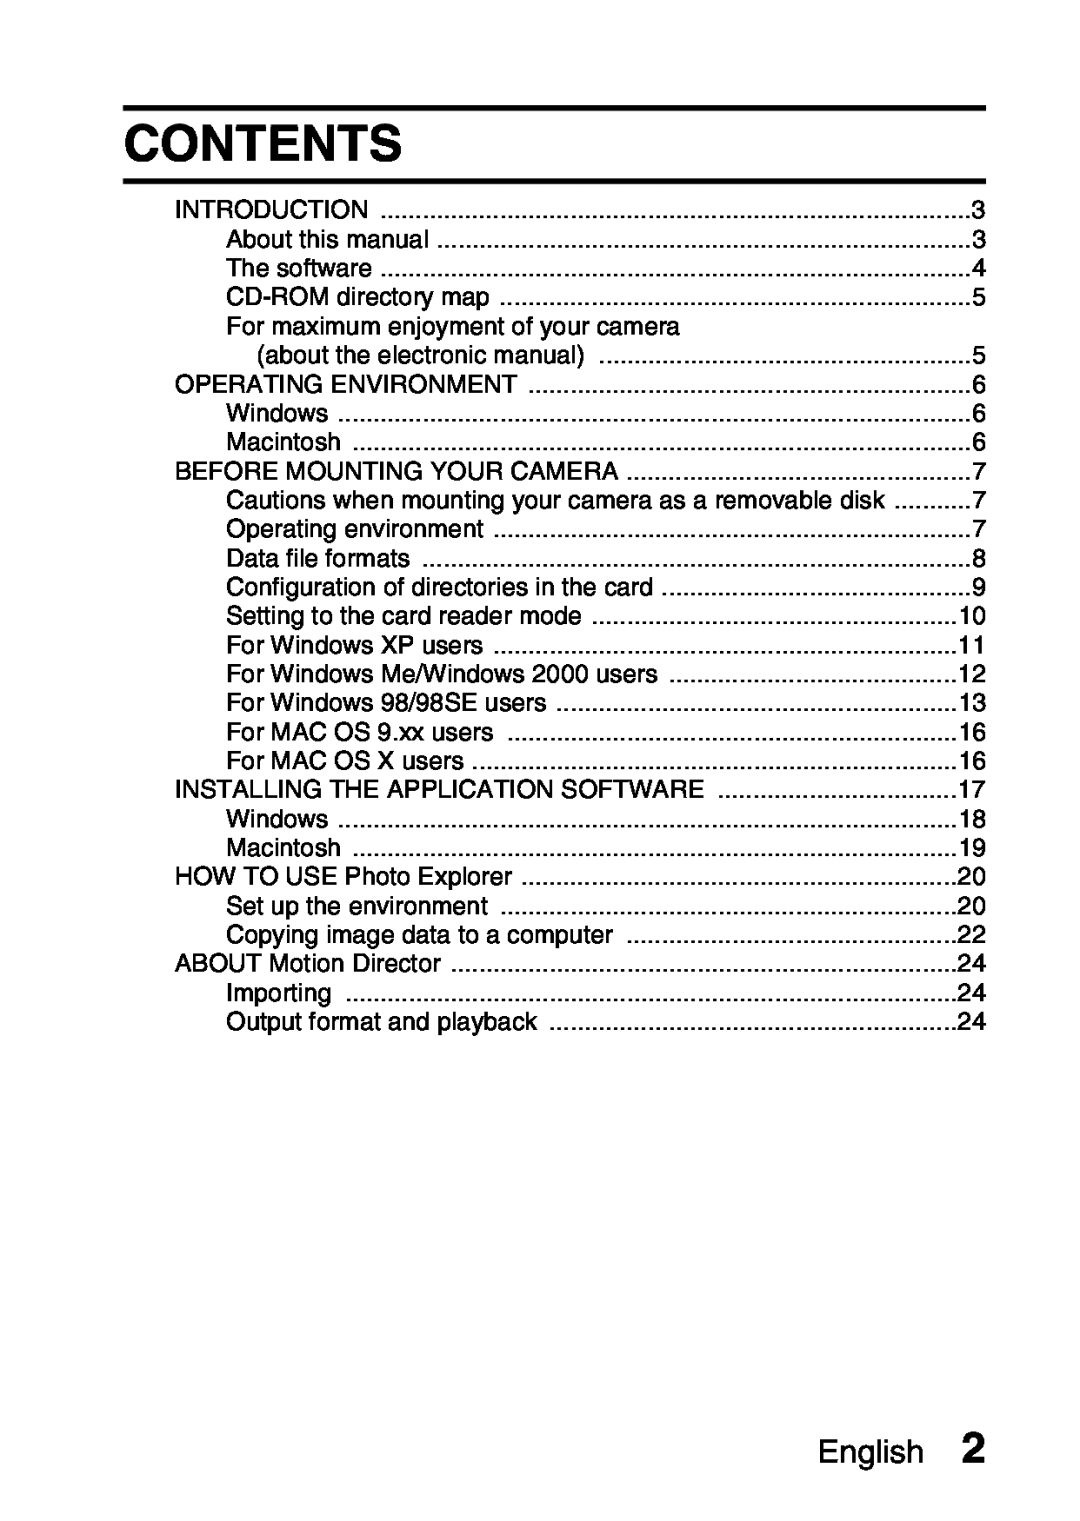 Sanyo VPC-S60 instruction manual Contents, English, For maximum enjoyment of your camera 